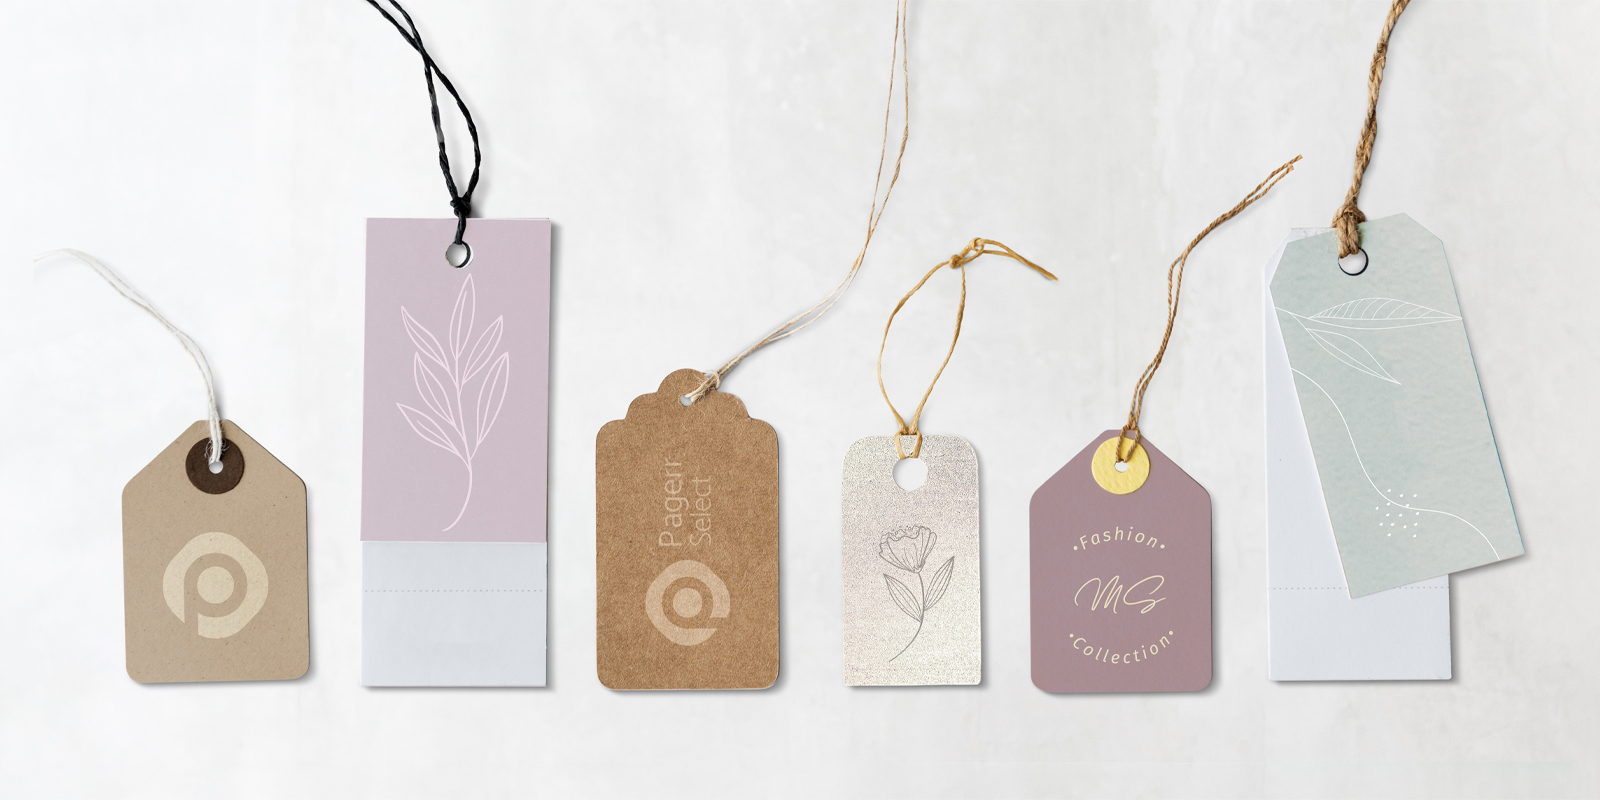 Product tags in Vilnius - Print with Pagerr